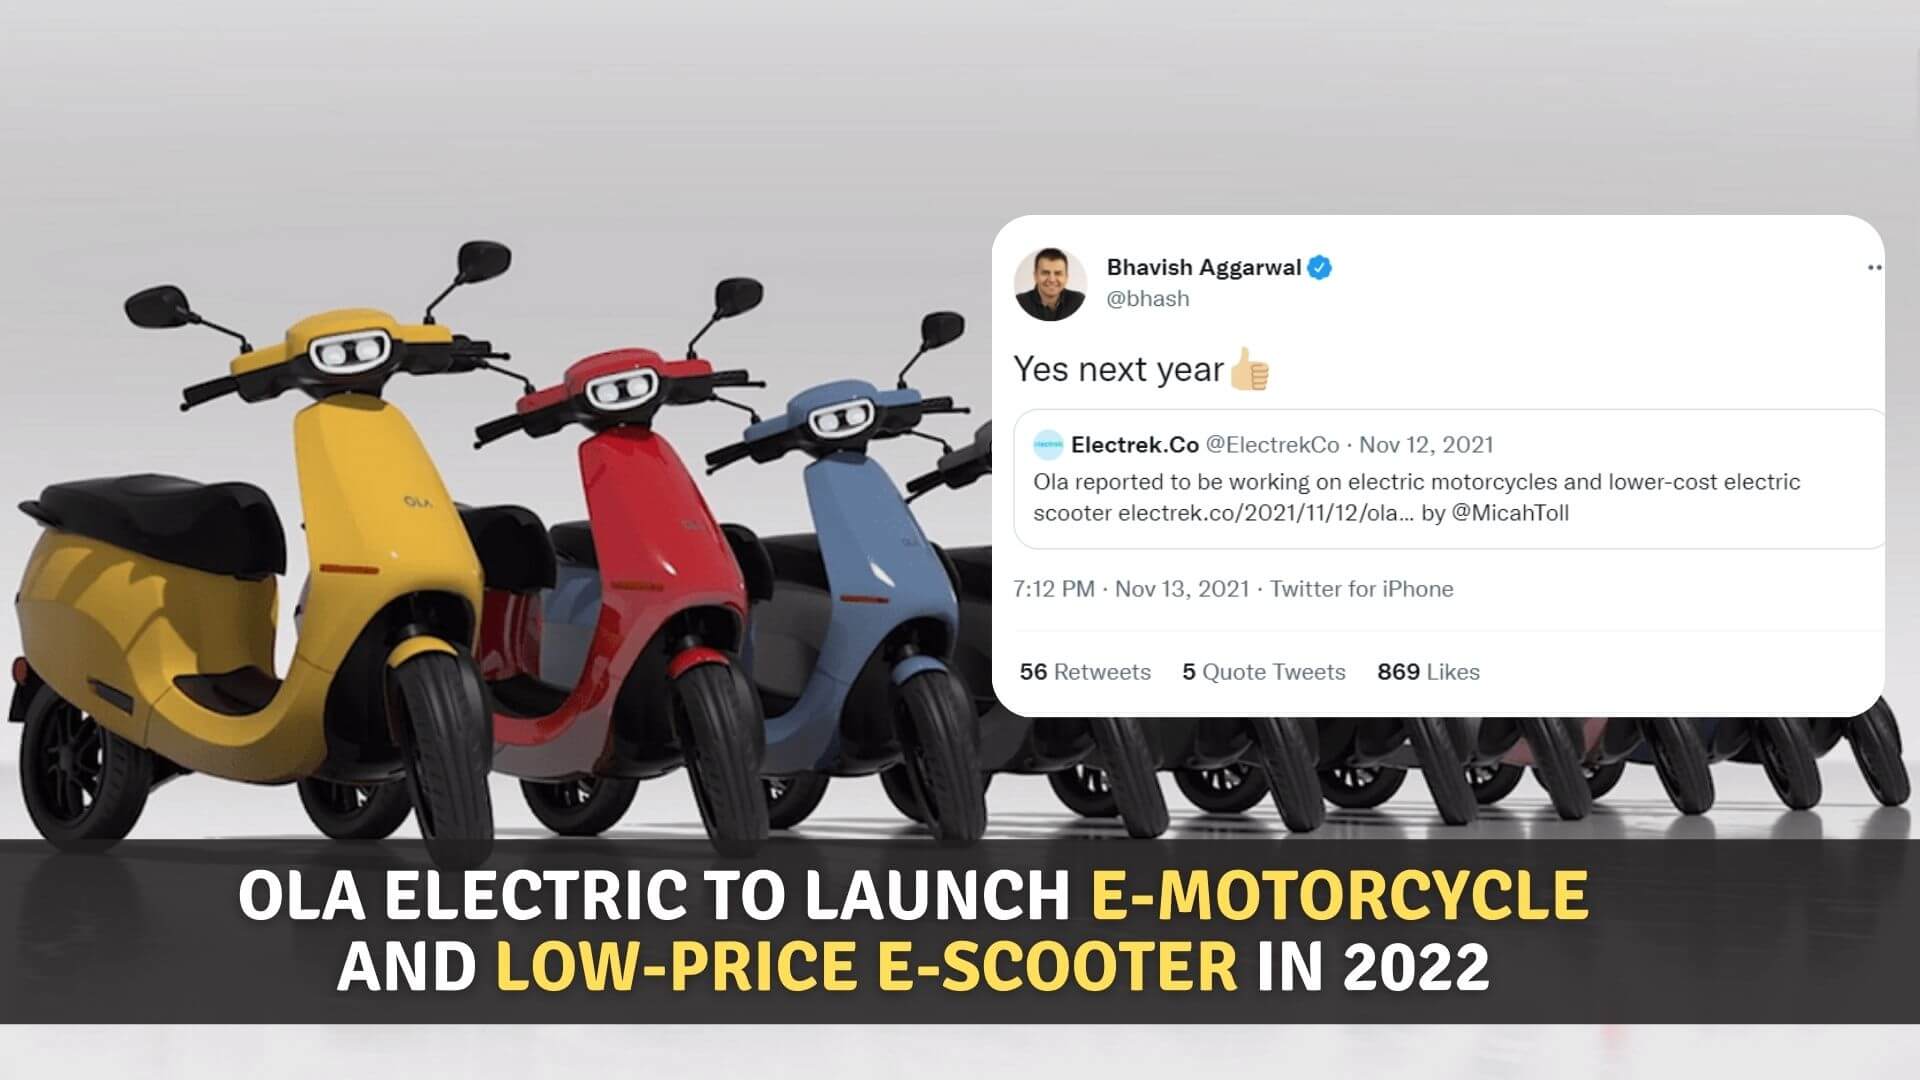 https://e-vehicleinfo.com/ola-electric-motorcycle-and-low-price-electric-scooter/